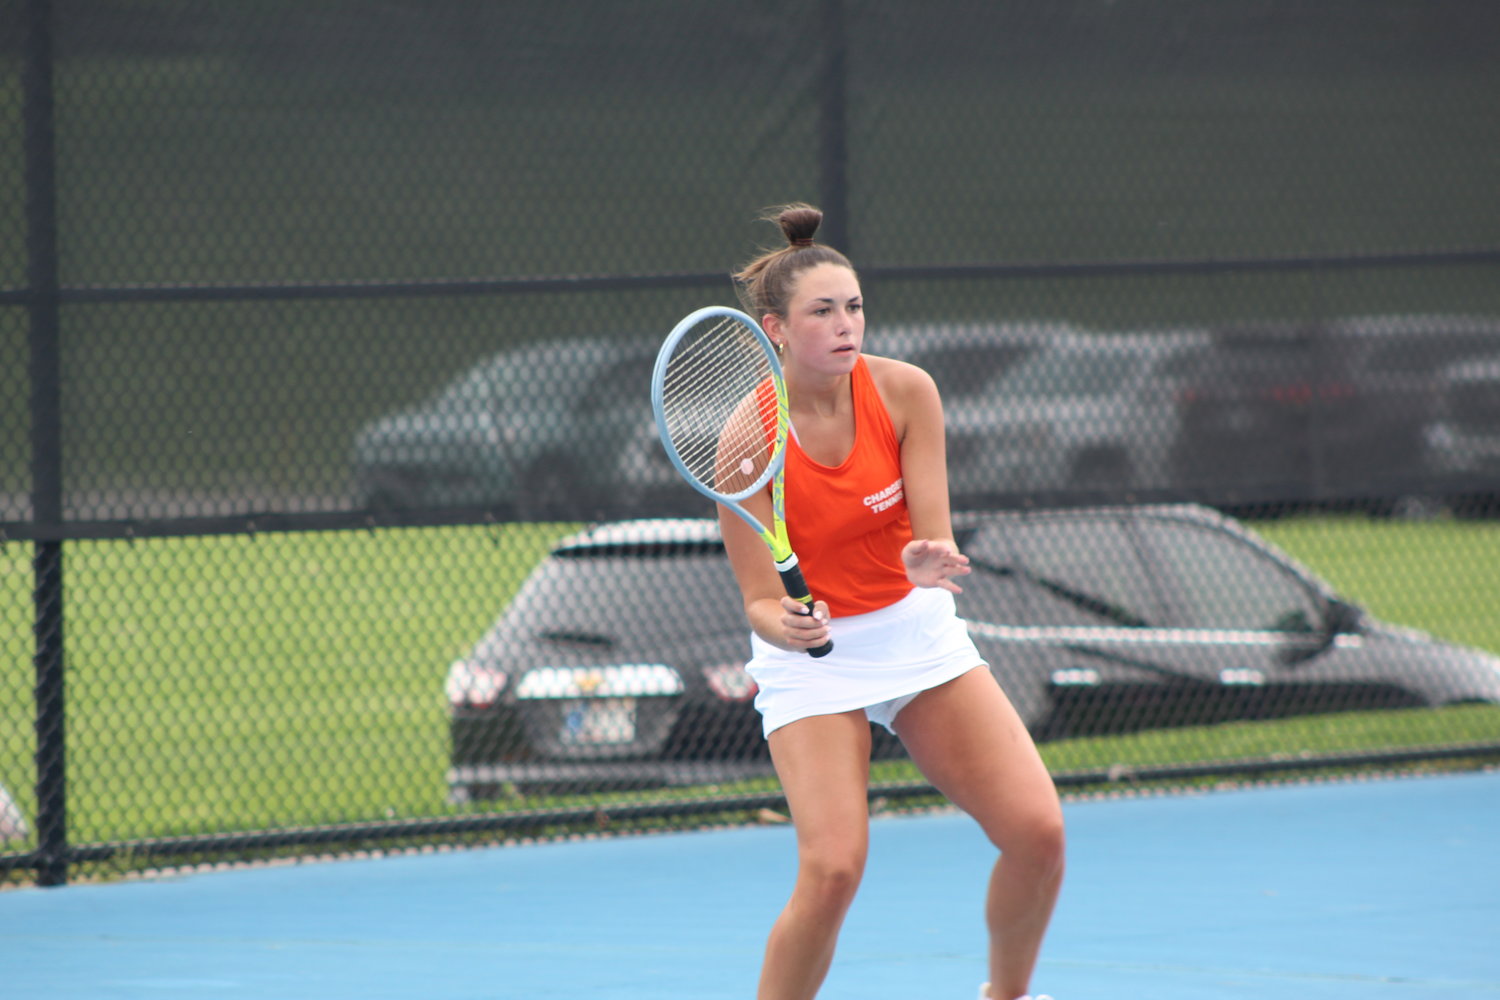 North Montgomery senior Carlie DeSmet will advance to play in the individual tournament next Tuesday at CHS.